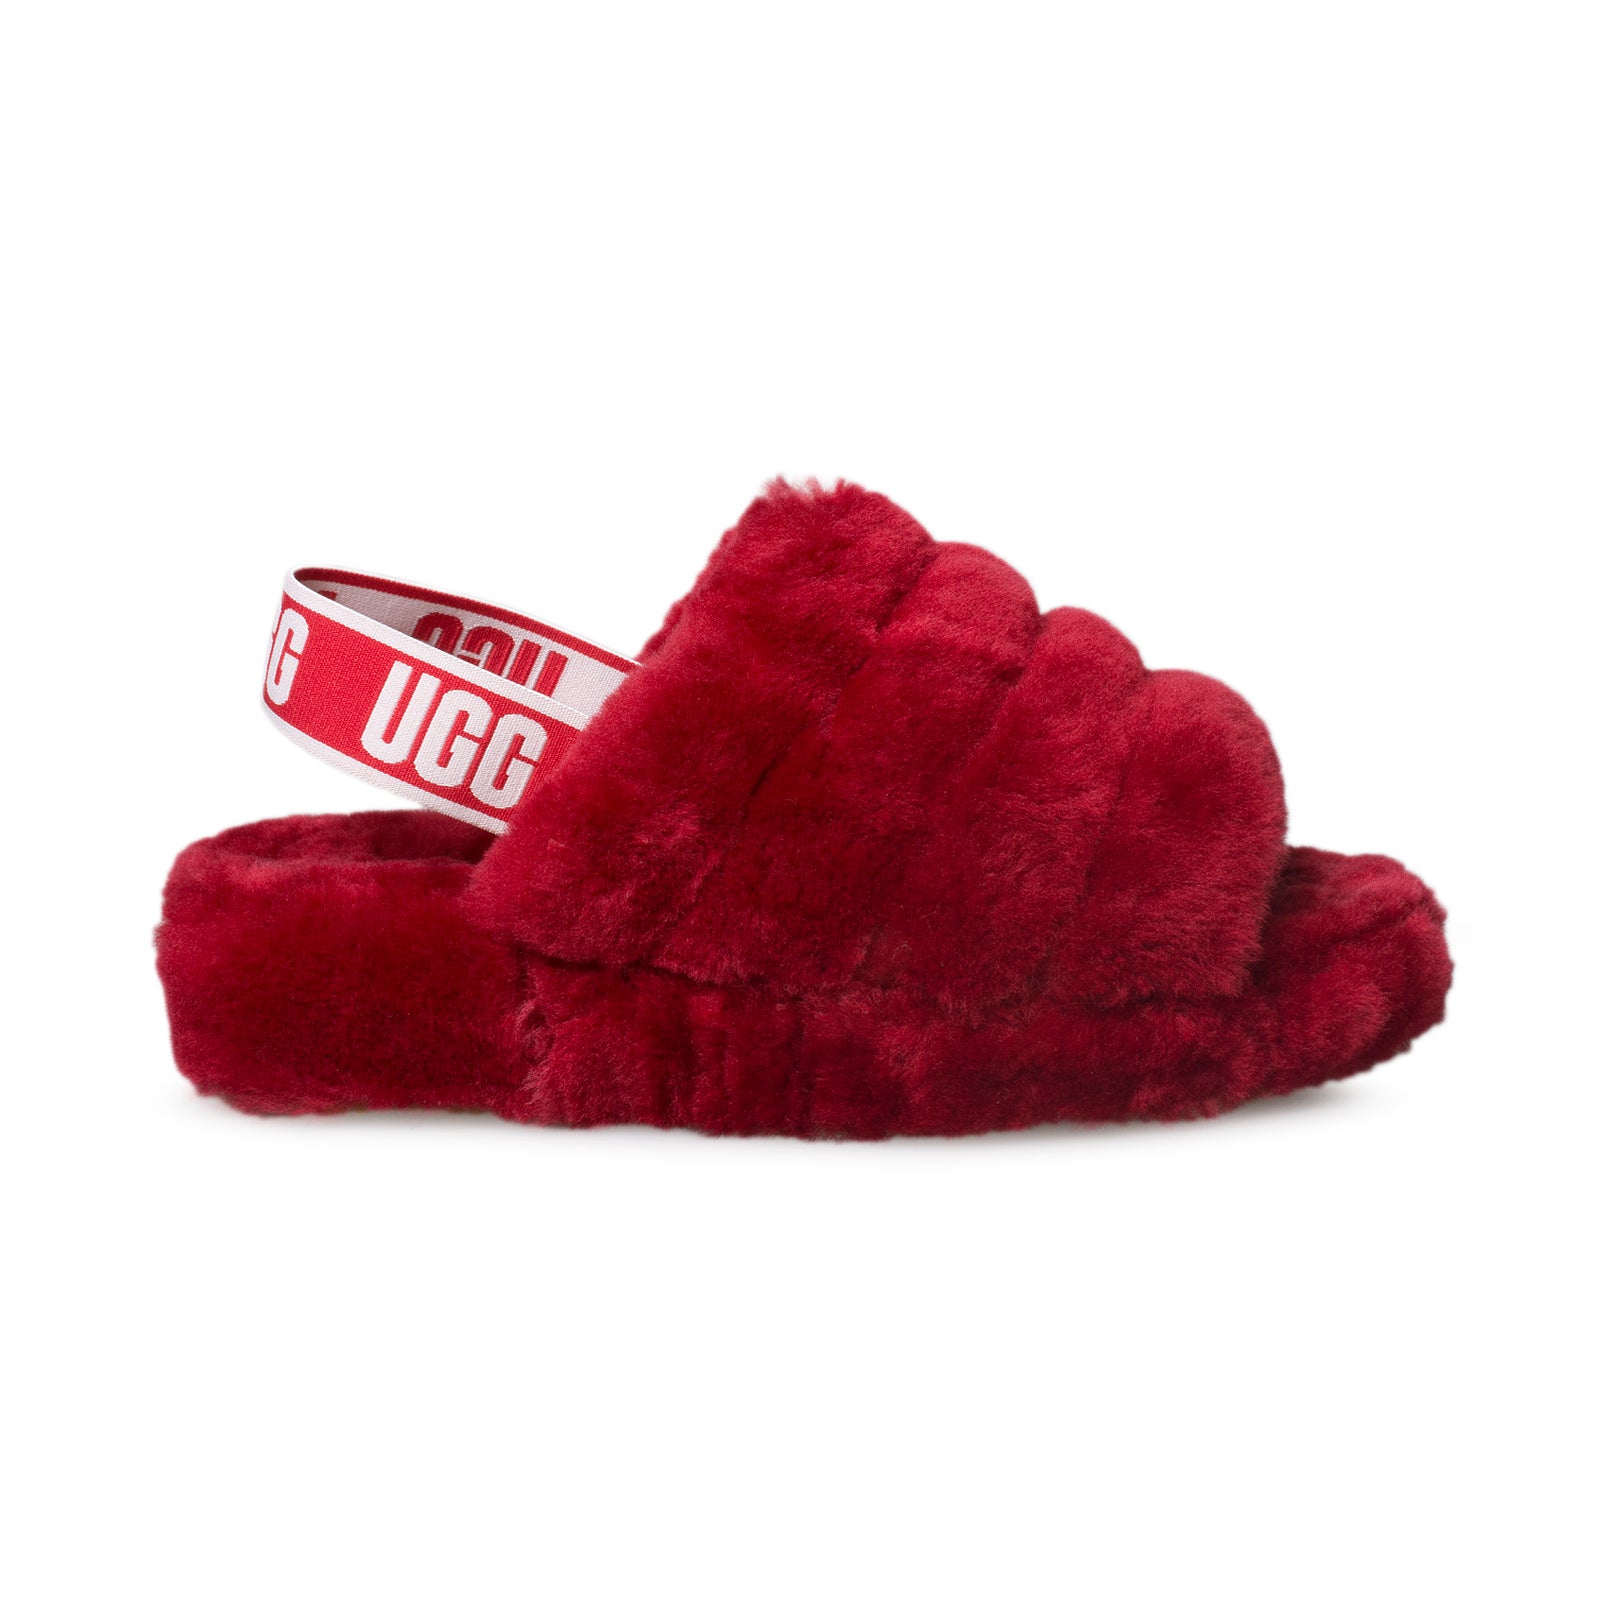 ribbon red ugg slippers